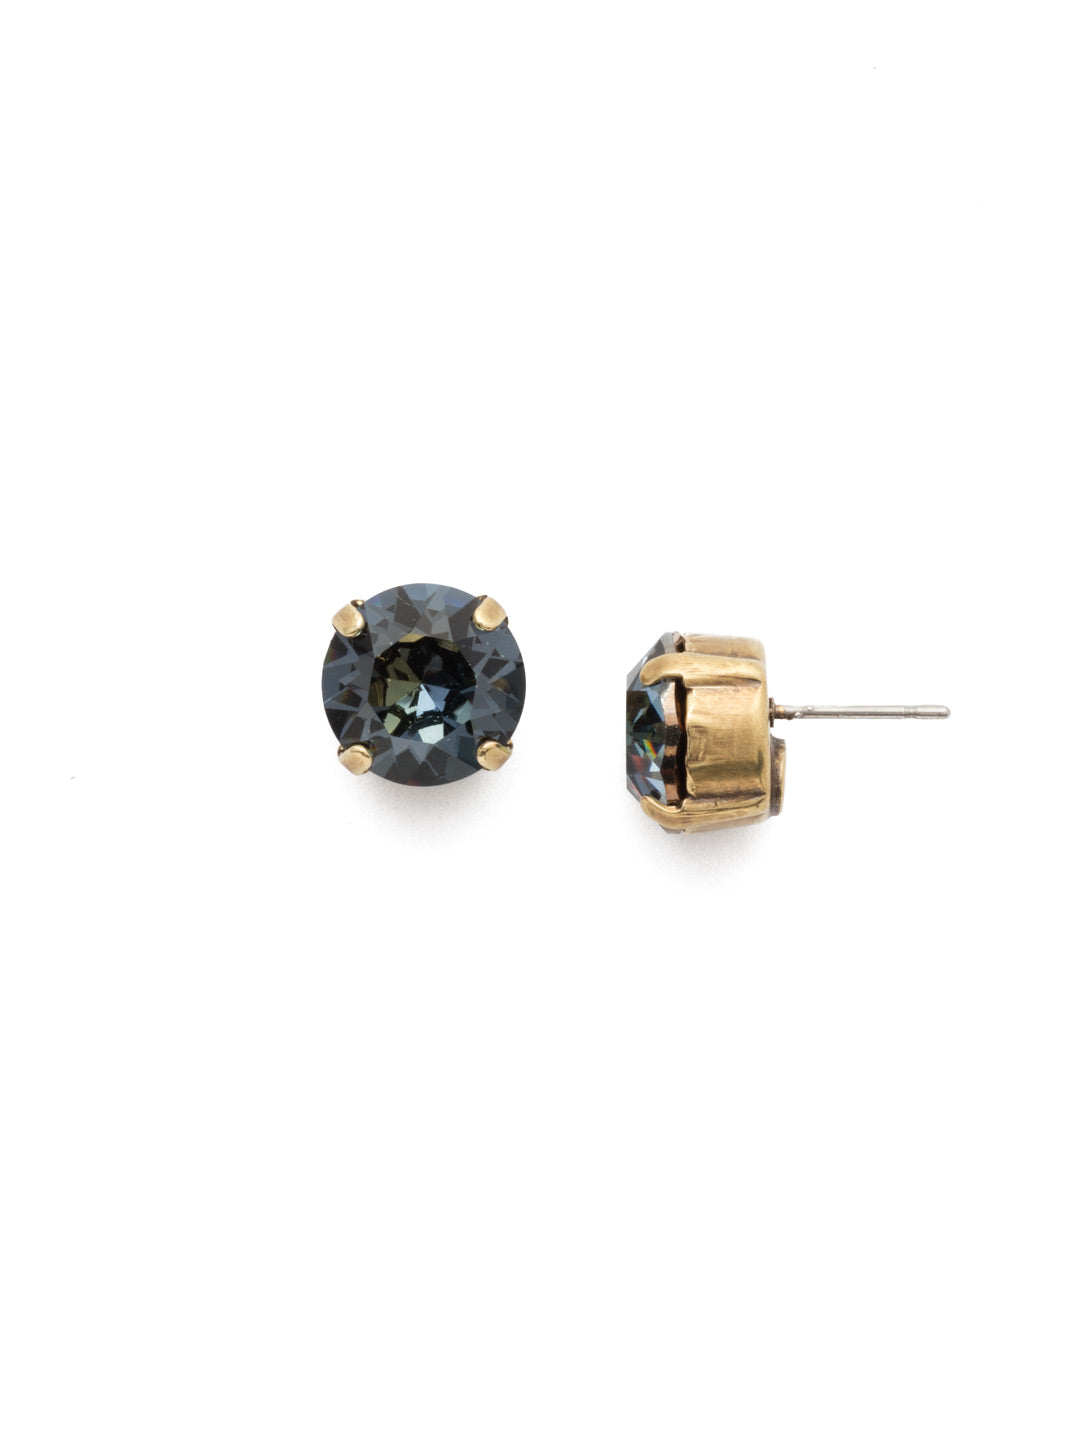 London Stud Earrings - ECM14AGSDE - <p>Everyone needs a great pair of studs. Add some classic sparkle to any occasion with these stud earrings. Need help picking a stud? <a href="https://www.sorrelli.com/blogs/sisterhood/round-stud-earrings-101-a-rundown-of-sizes-styles-and-sparkle">Check out our size guide!</a> From Sorrelli's Selvedge Denim collection in our Antique Gold-tone finish.</p>